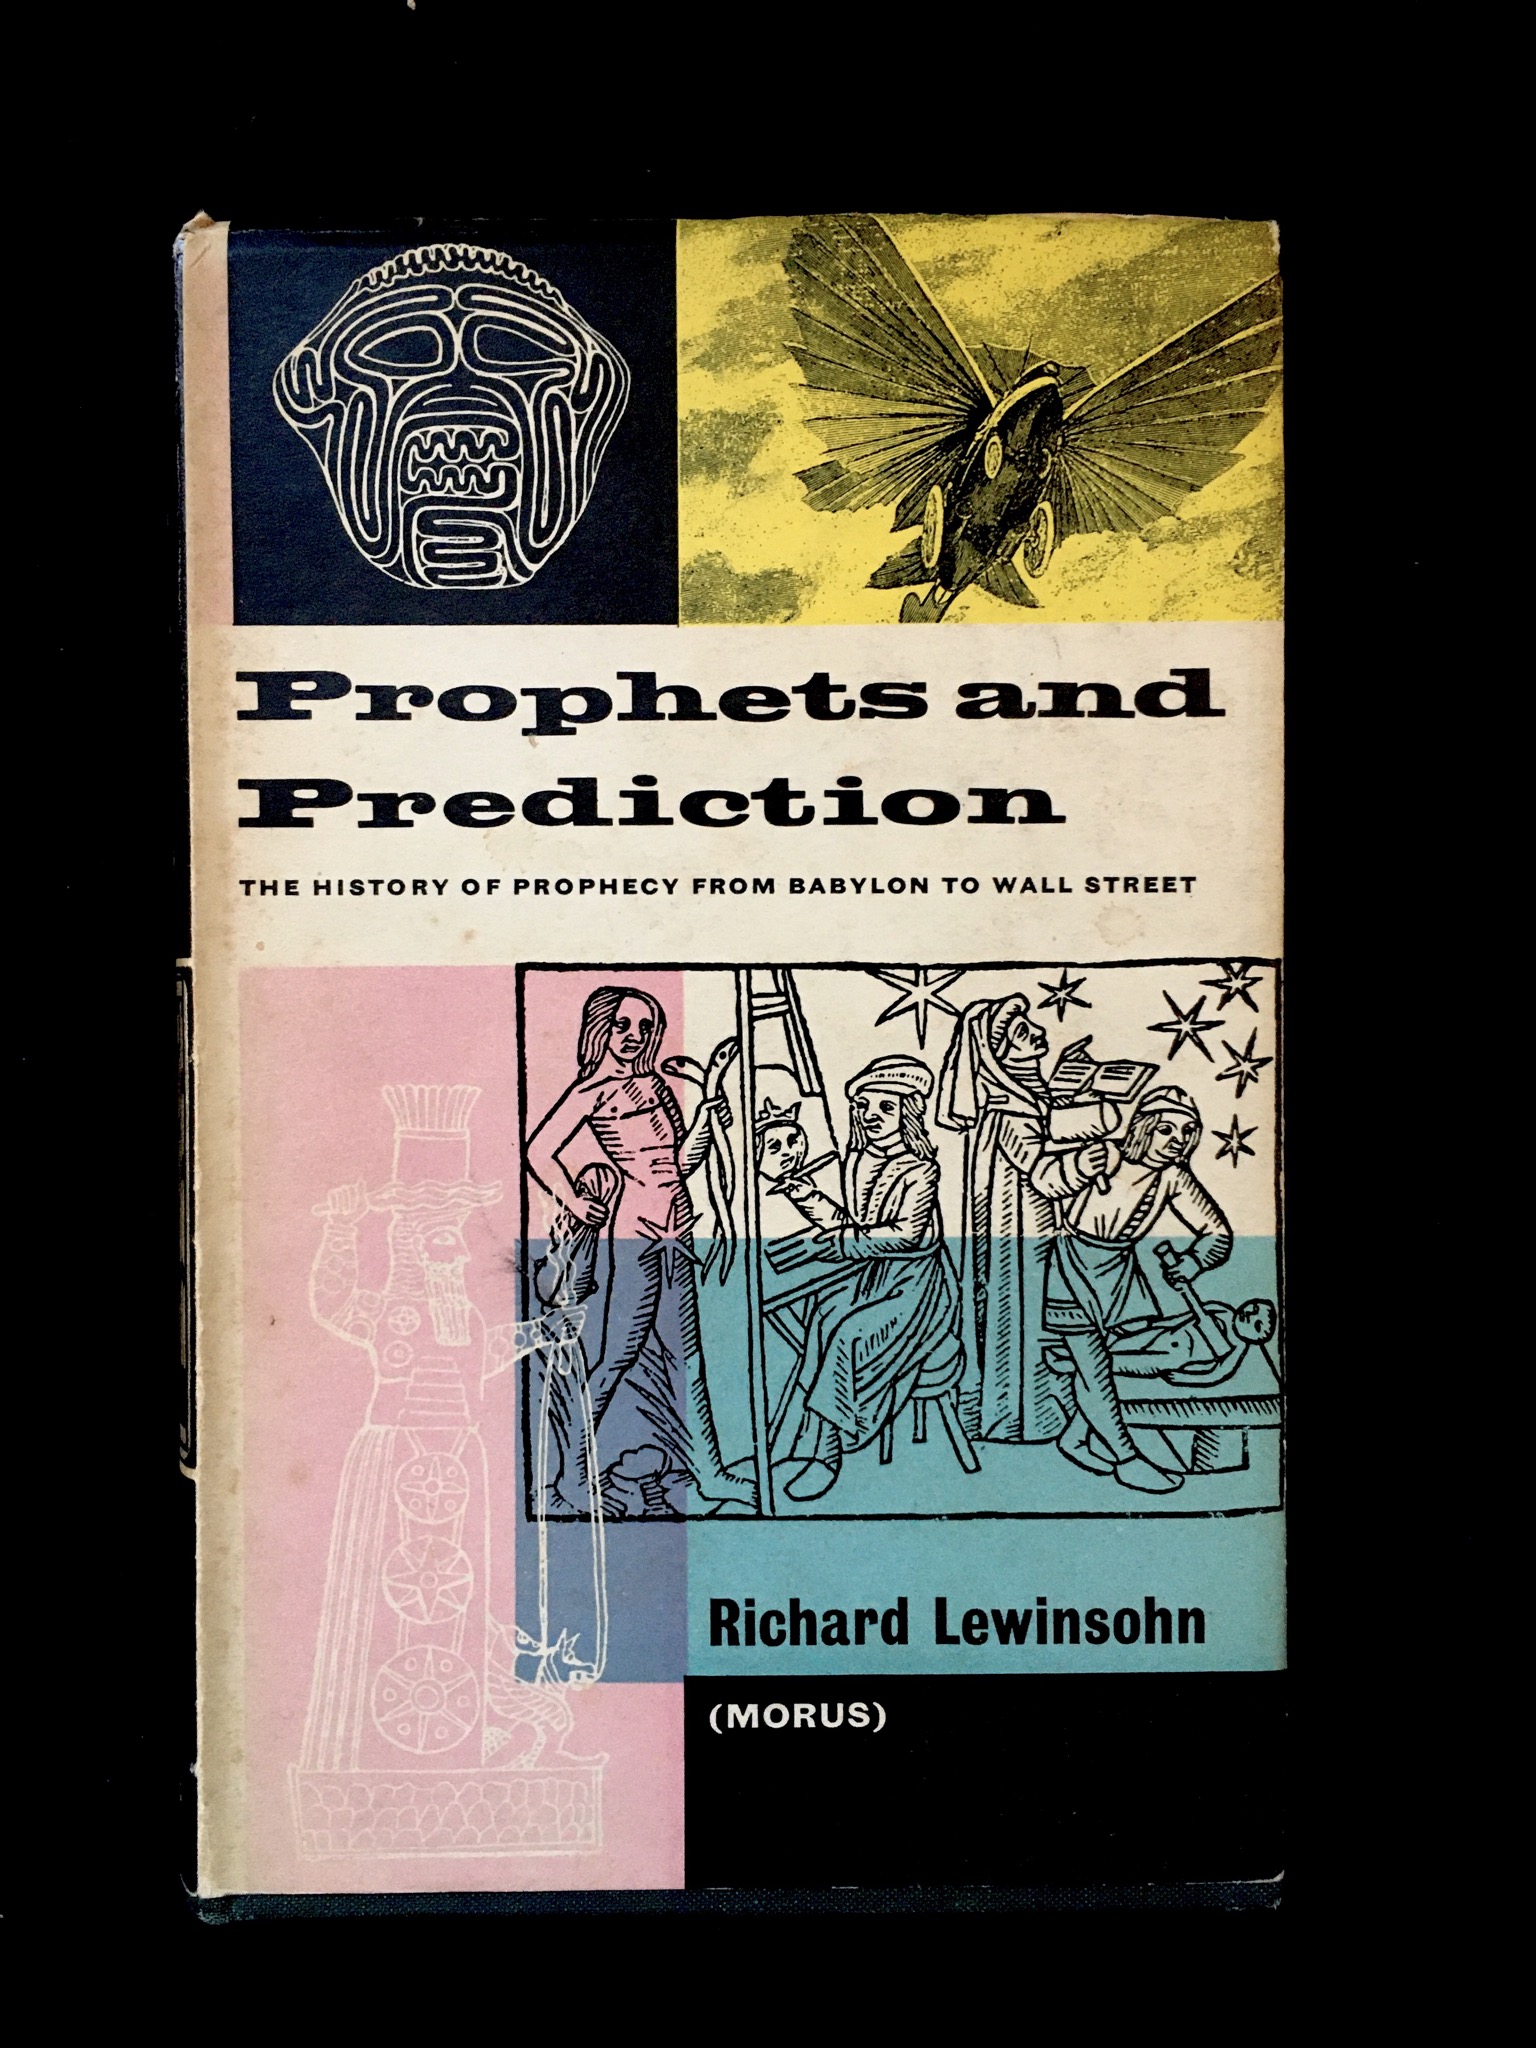 Prophets and Prediction: The History of Prophecy From Bablyon To Wall Street by Richard Lewinsohn